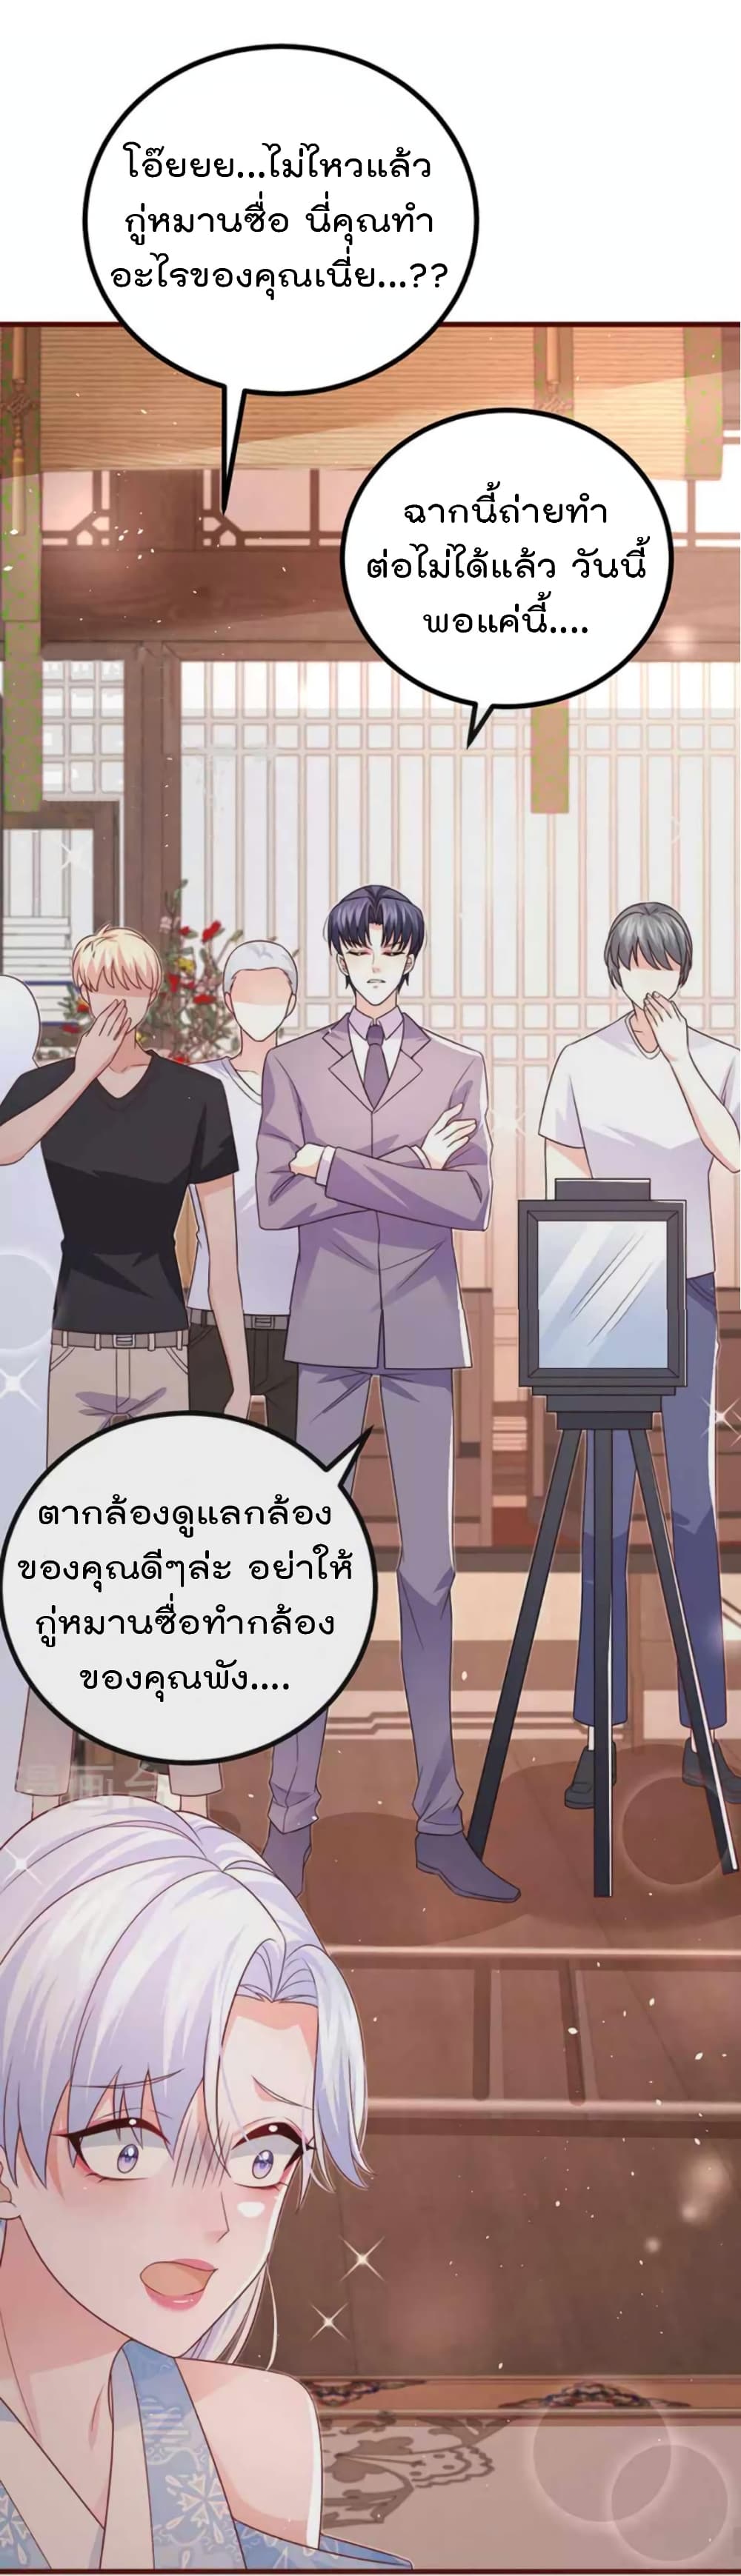 One Hundred Ways to Abuse Scum ตอนที่ 92 (37)